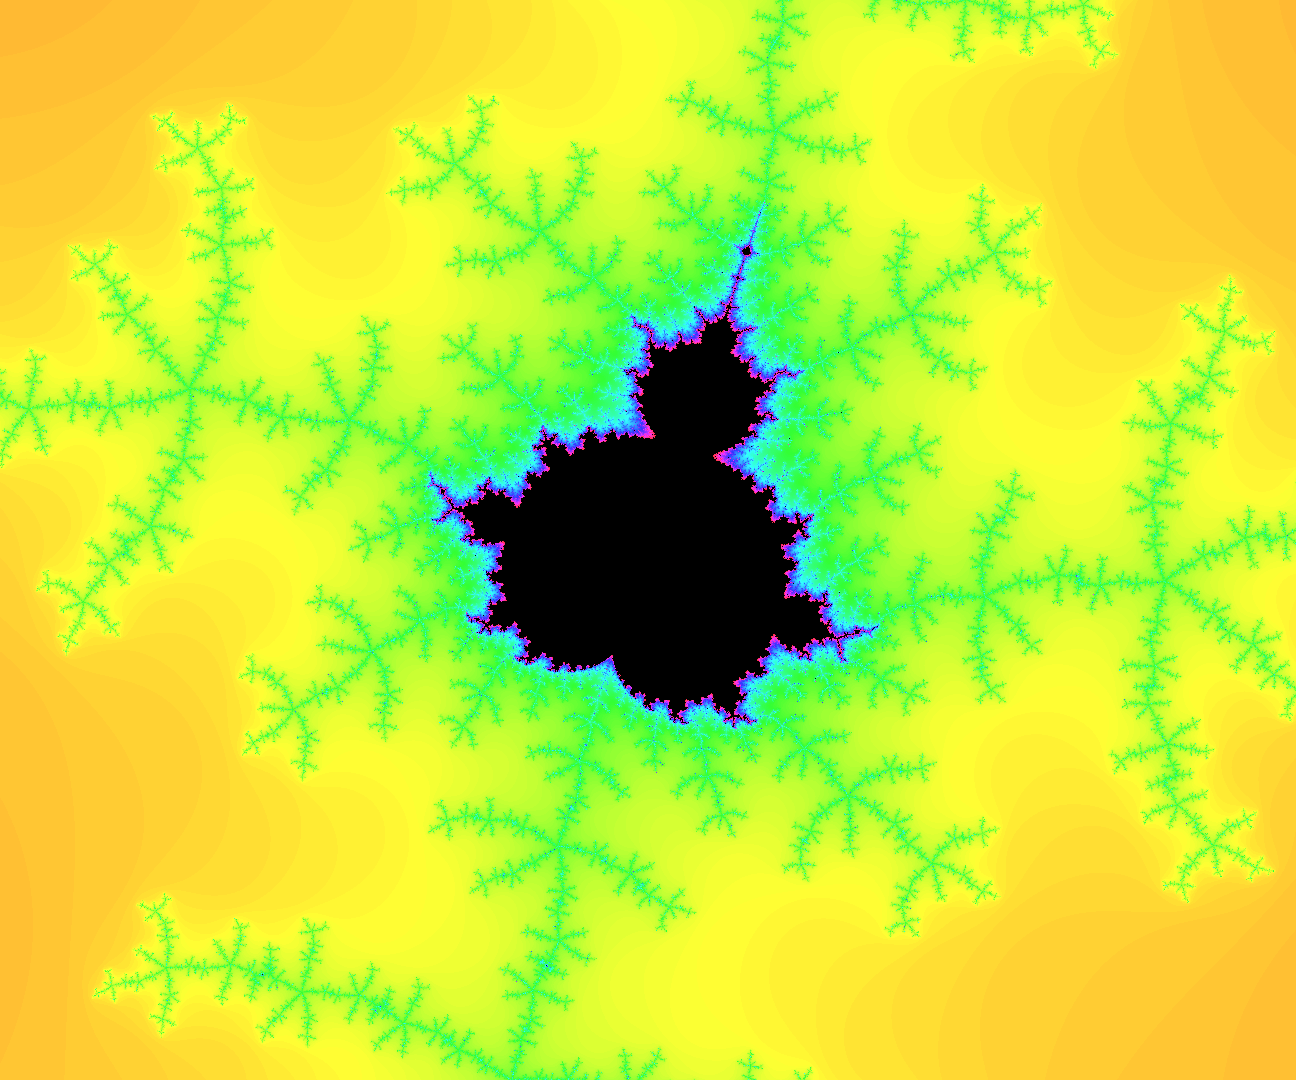 A Java program that renders the Mandelbrot set in color, allowing users to zoom and save the current render as an image.